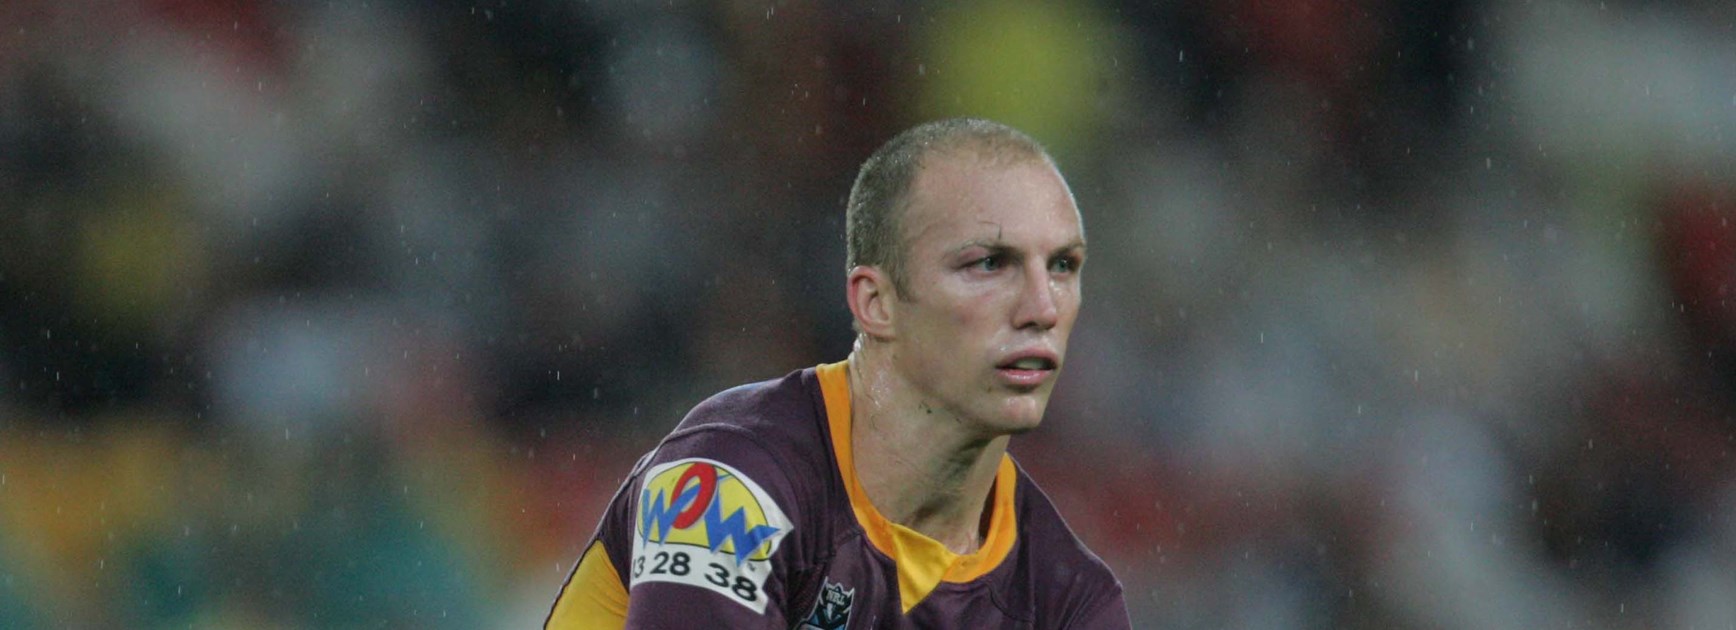 August 22: Sick Lockyer the hero; two clubs close doors